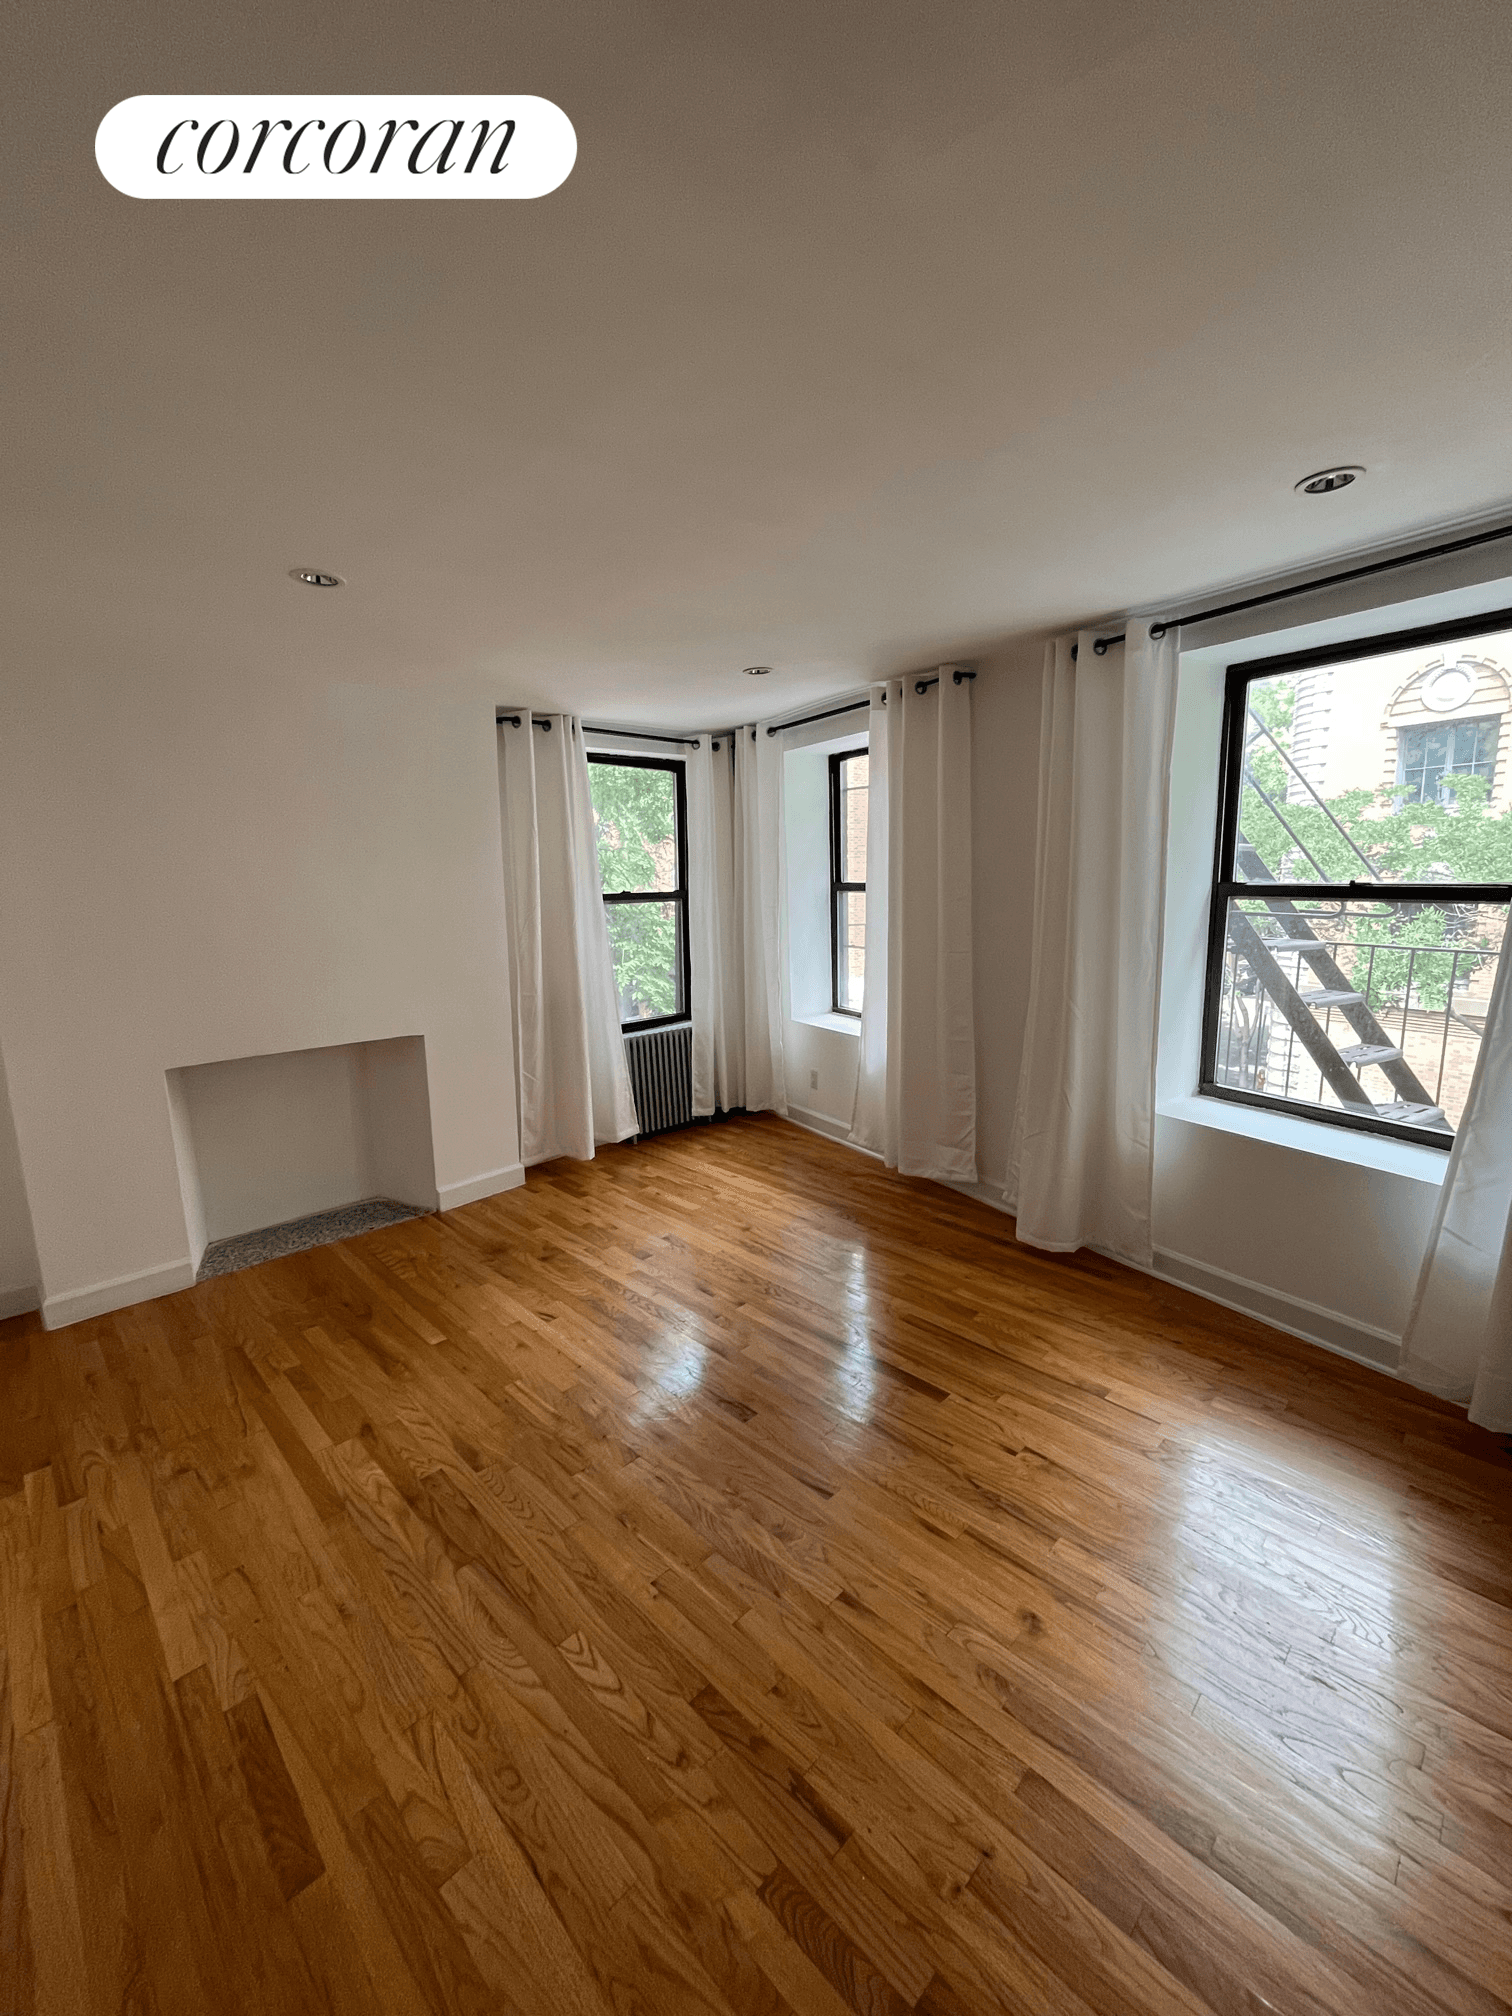 Spacious Duplex in the heart of Soho, corner of Elizabeth and Spring.